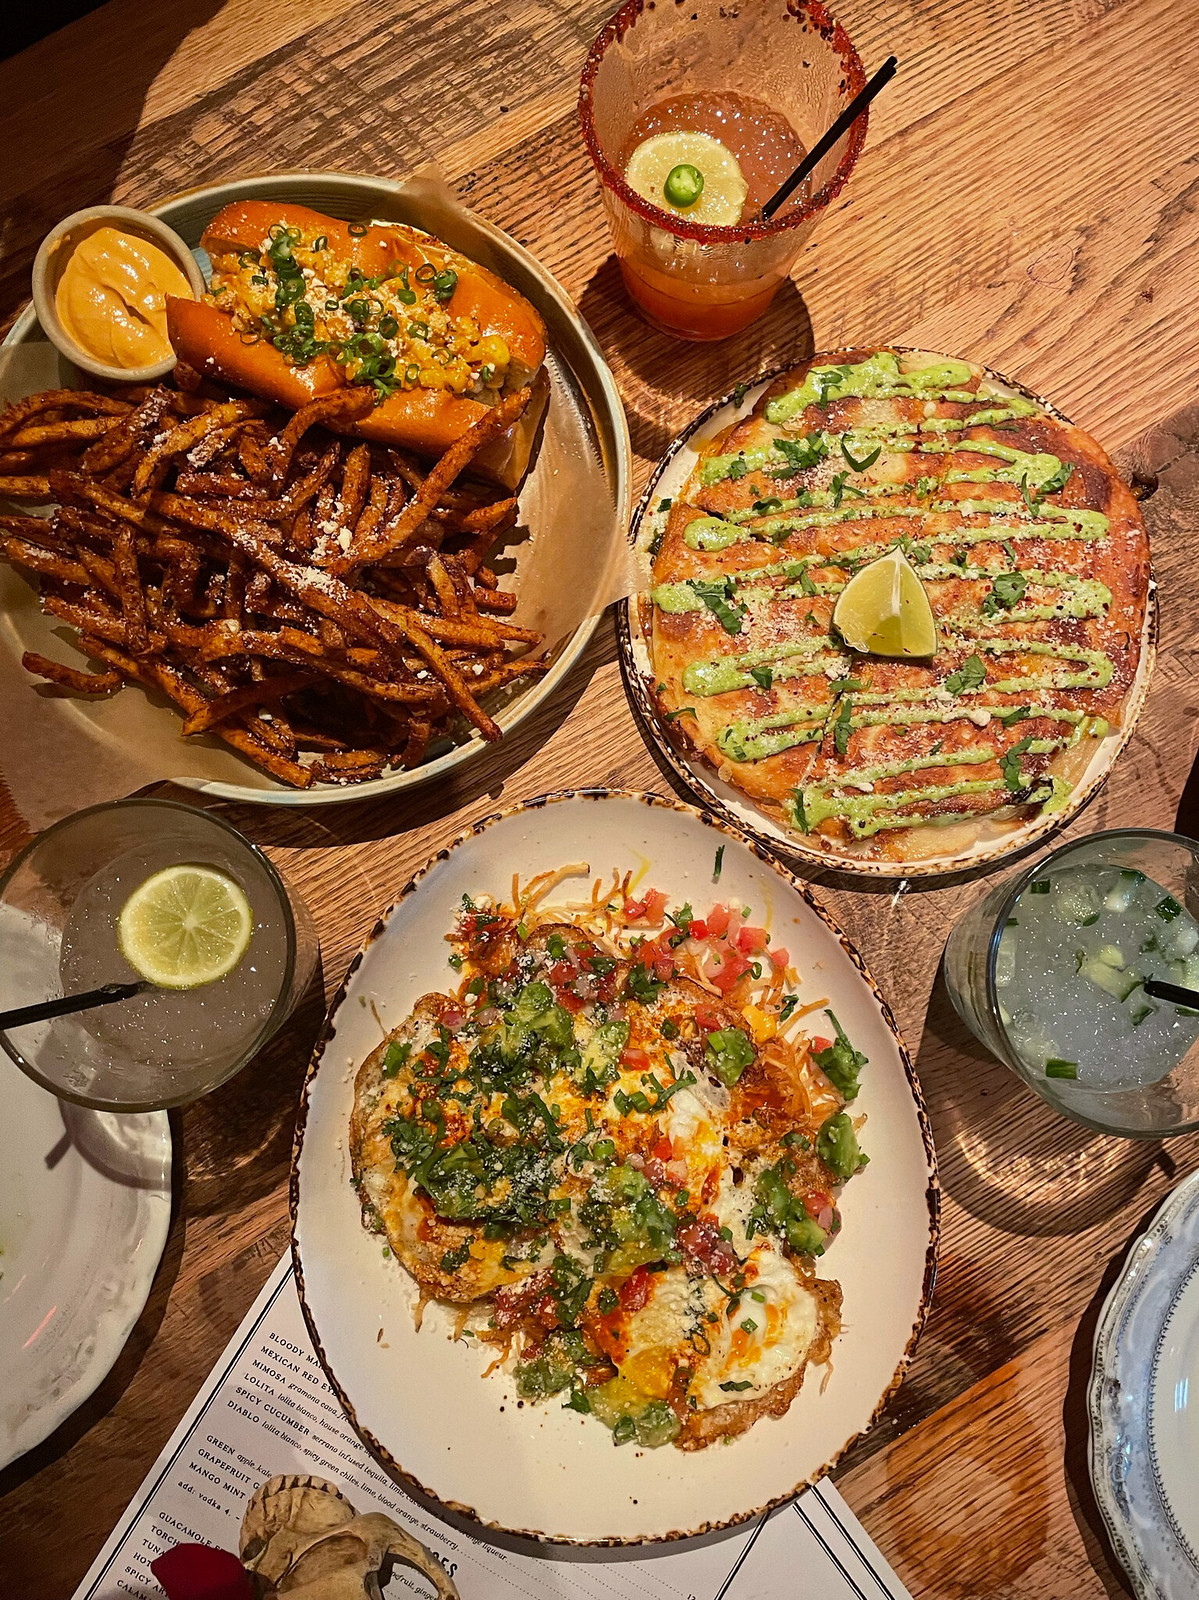 Lolita Cocina & Tequila Bar | Best Places to Eat in Boston | 2 Days in Boston | 48 Hours in Boston | The Perfect Weekend Itinerary | Best Things to Do in Boston | Explore Boston, MA | Weekend in Boston, Massachusetts | Boston Travel Guide | Things to Do & Where to Stay | Top Things to do in Boston